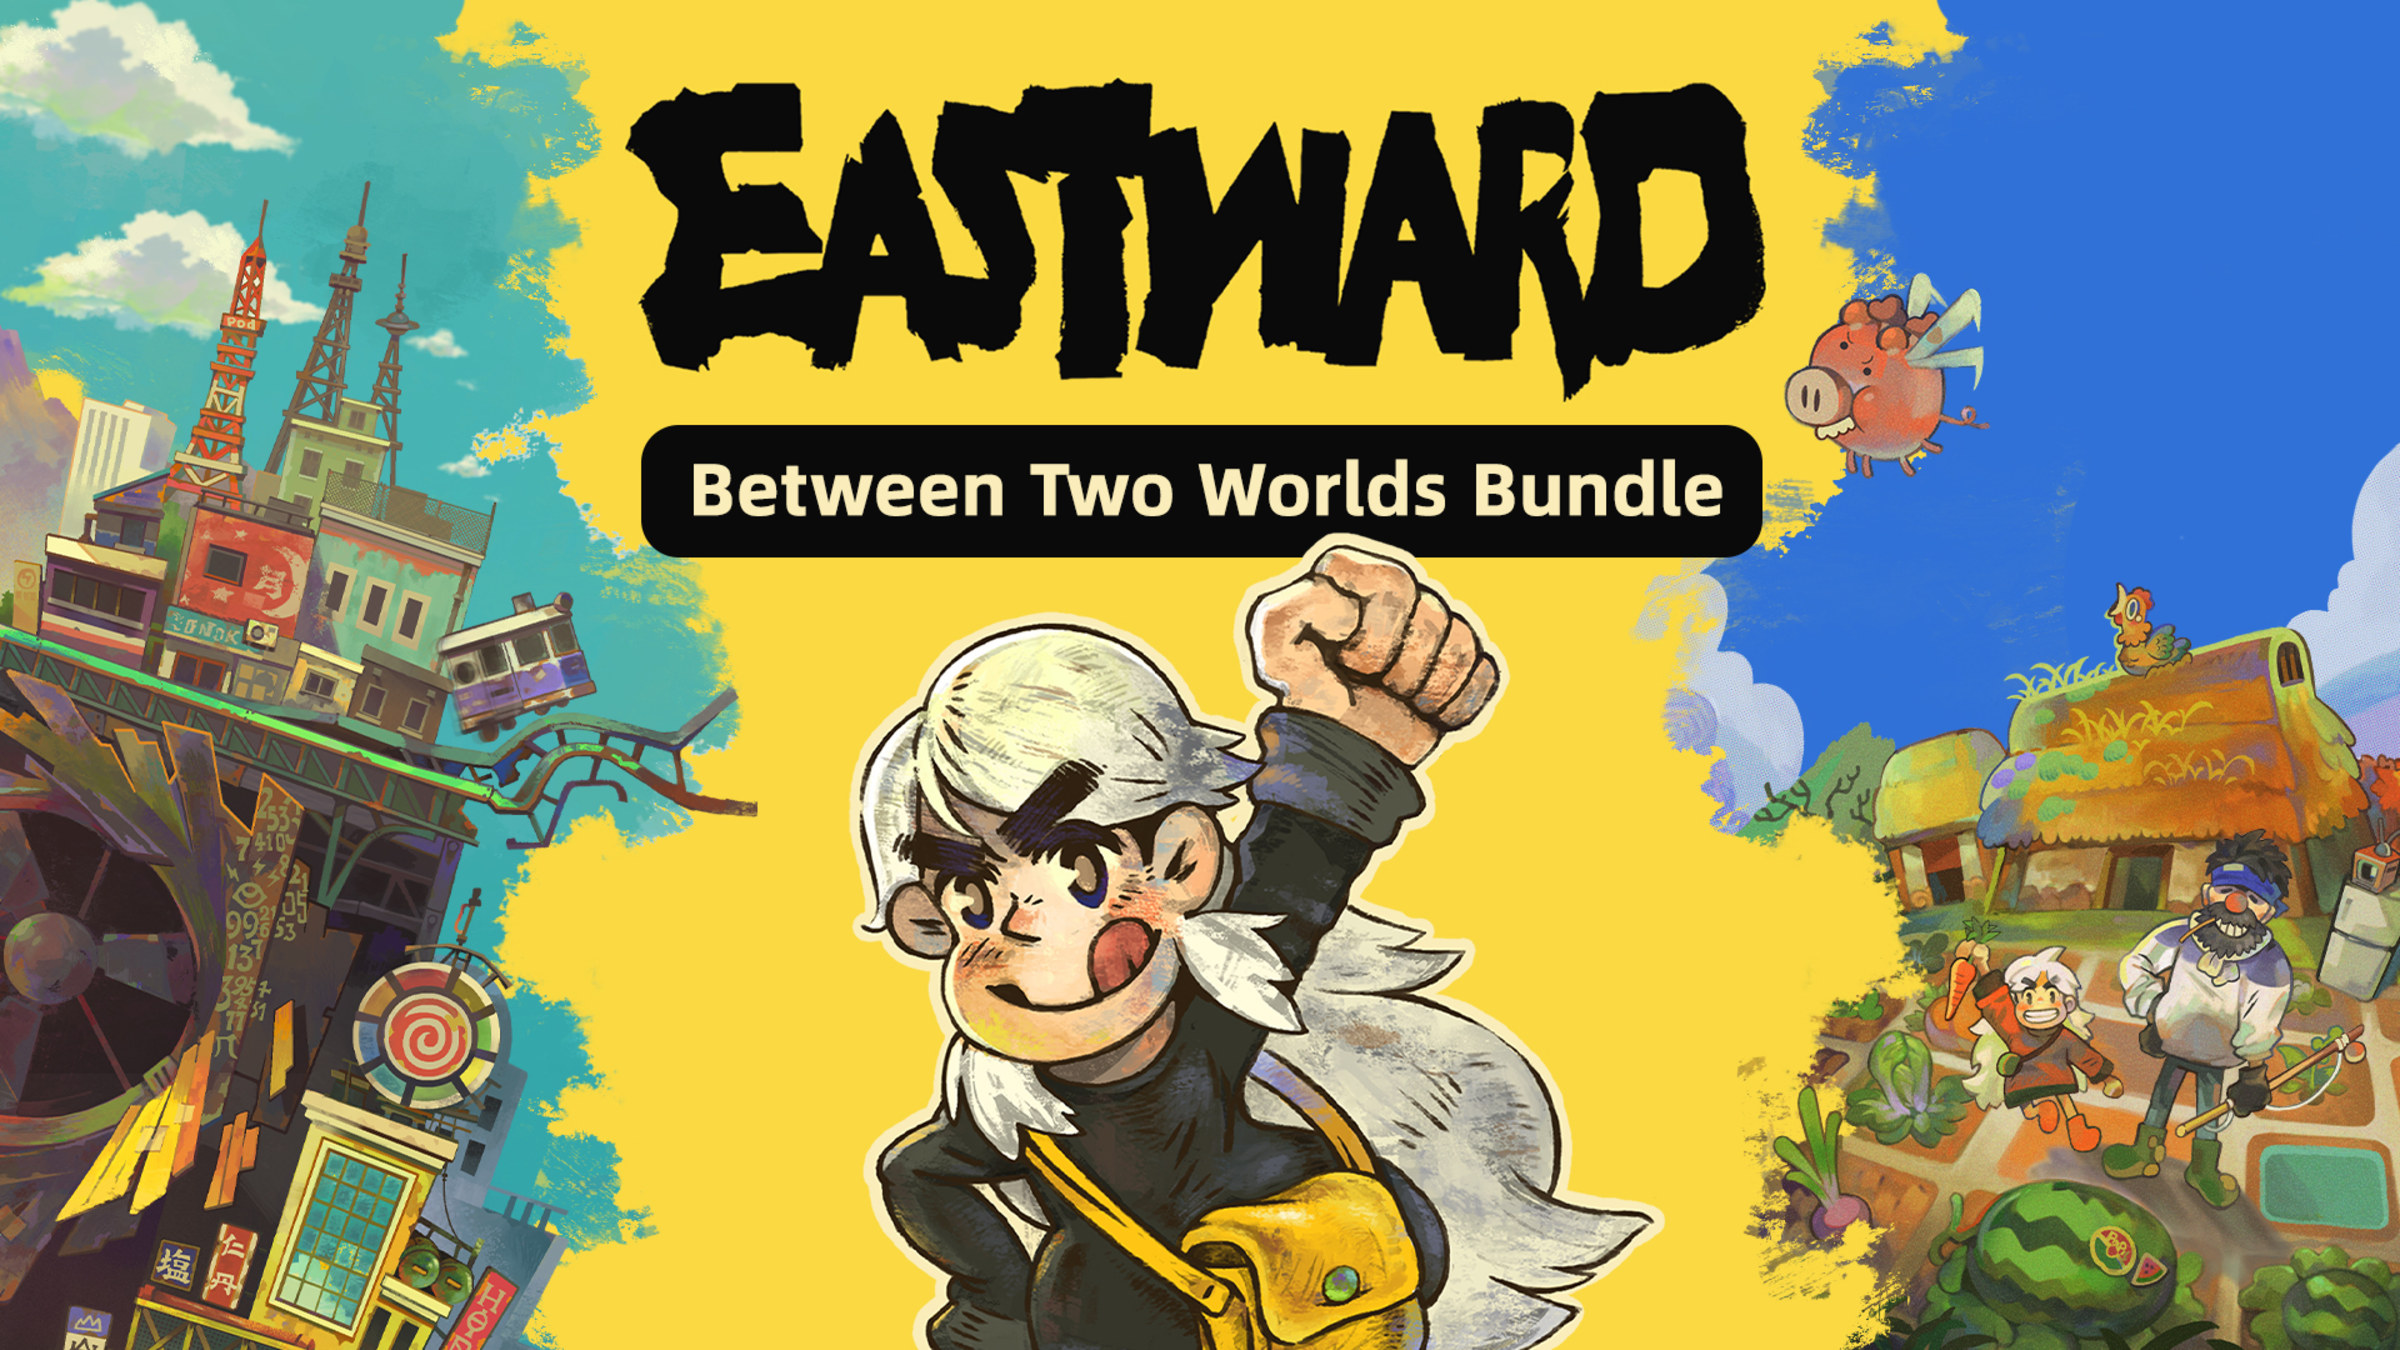 Eastward is coming to Nintendo Switch Online as a Free Trial (Full Game  Access Starting 9/27 Until 10/03) : r/NintendoSwitch